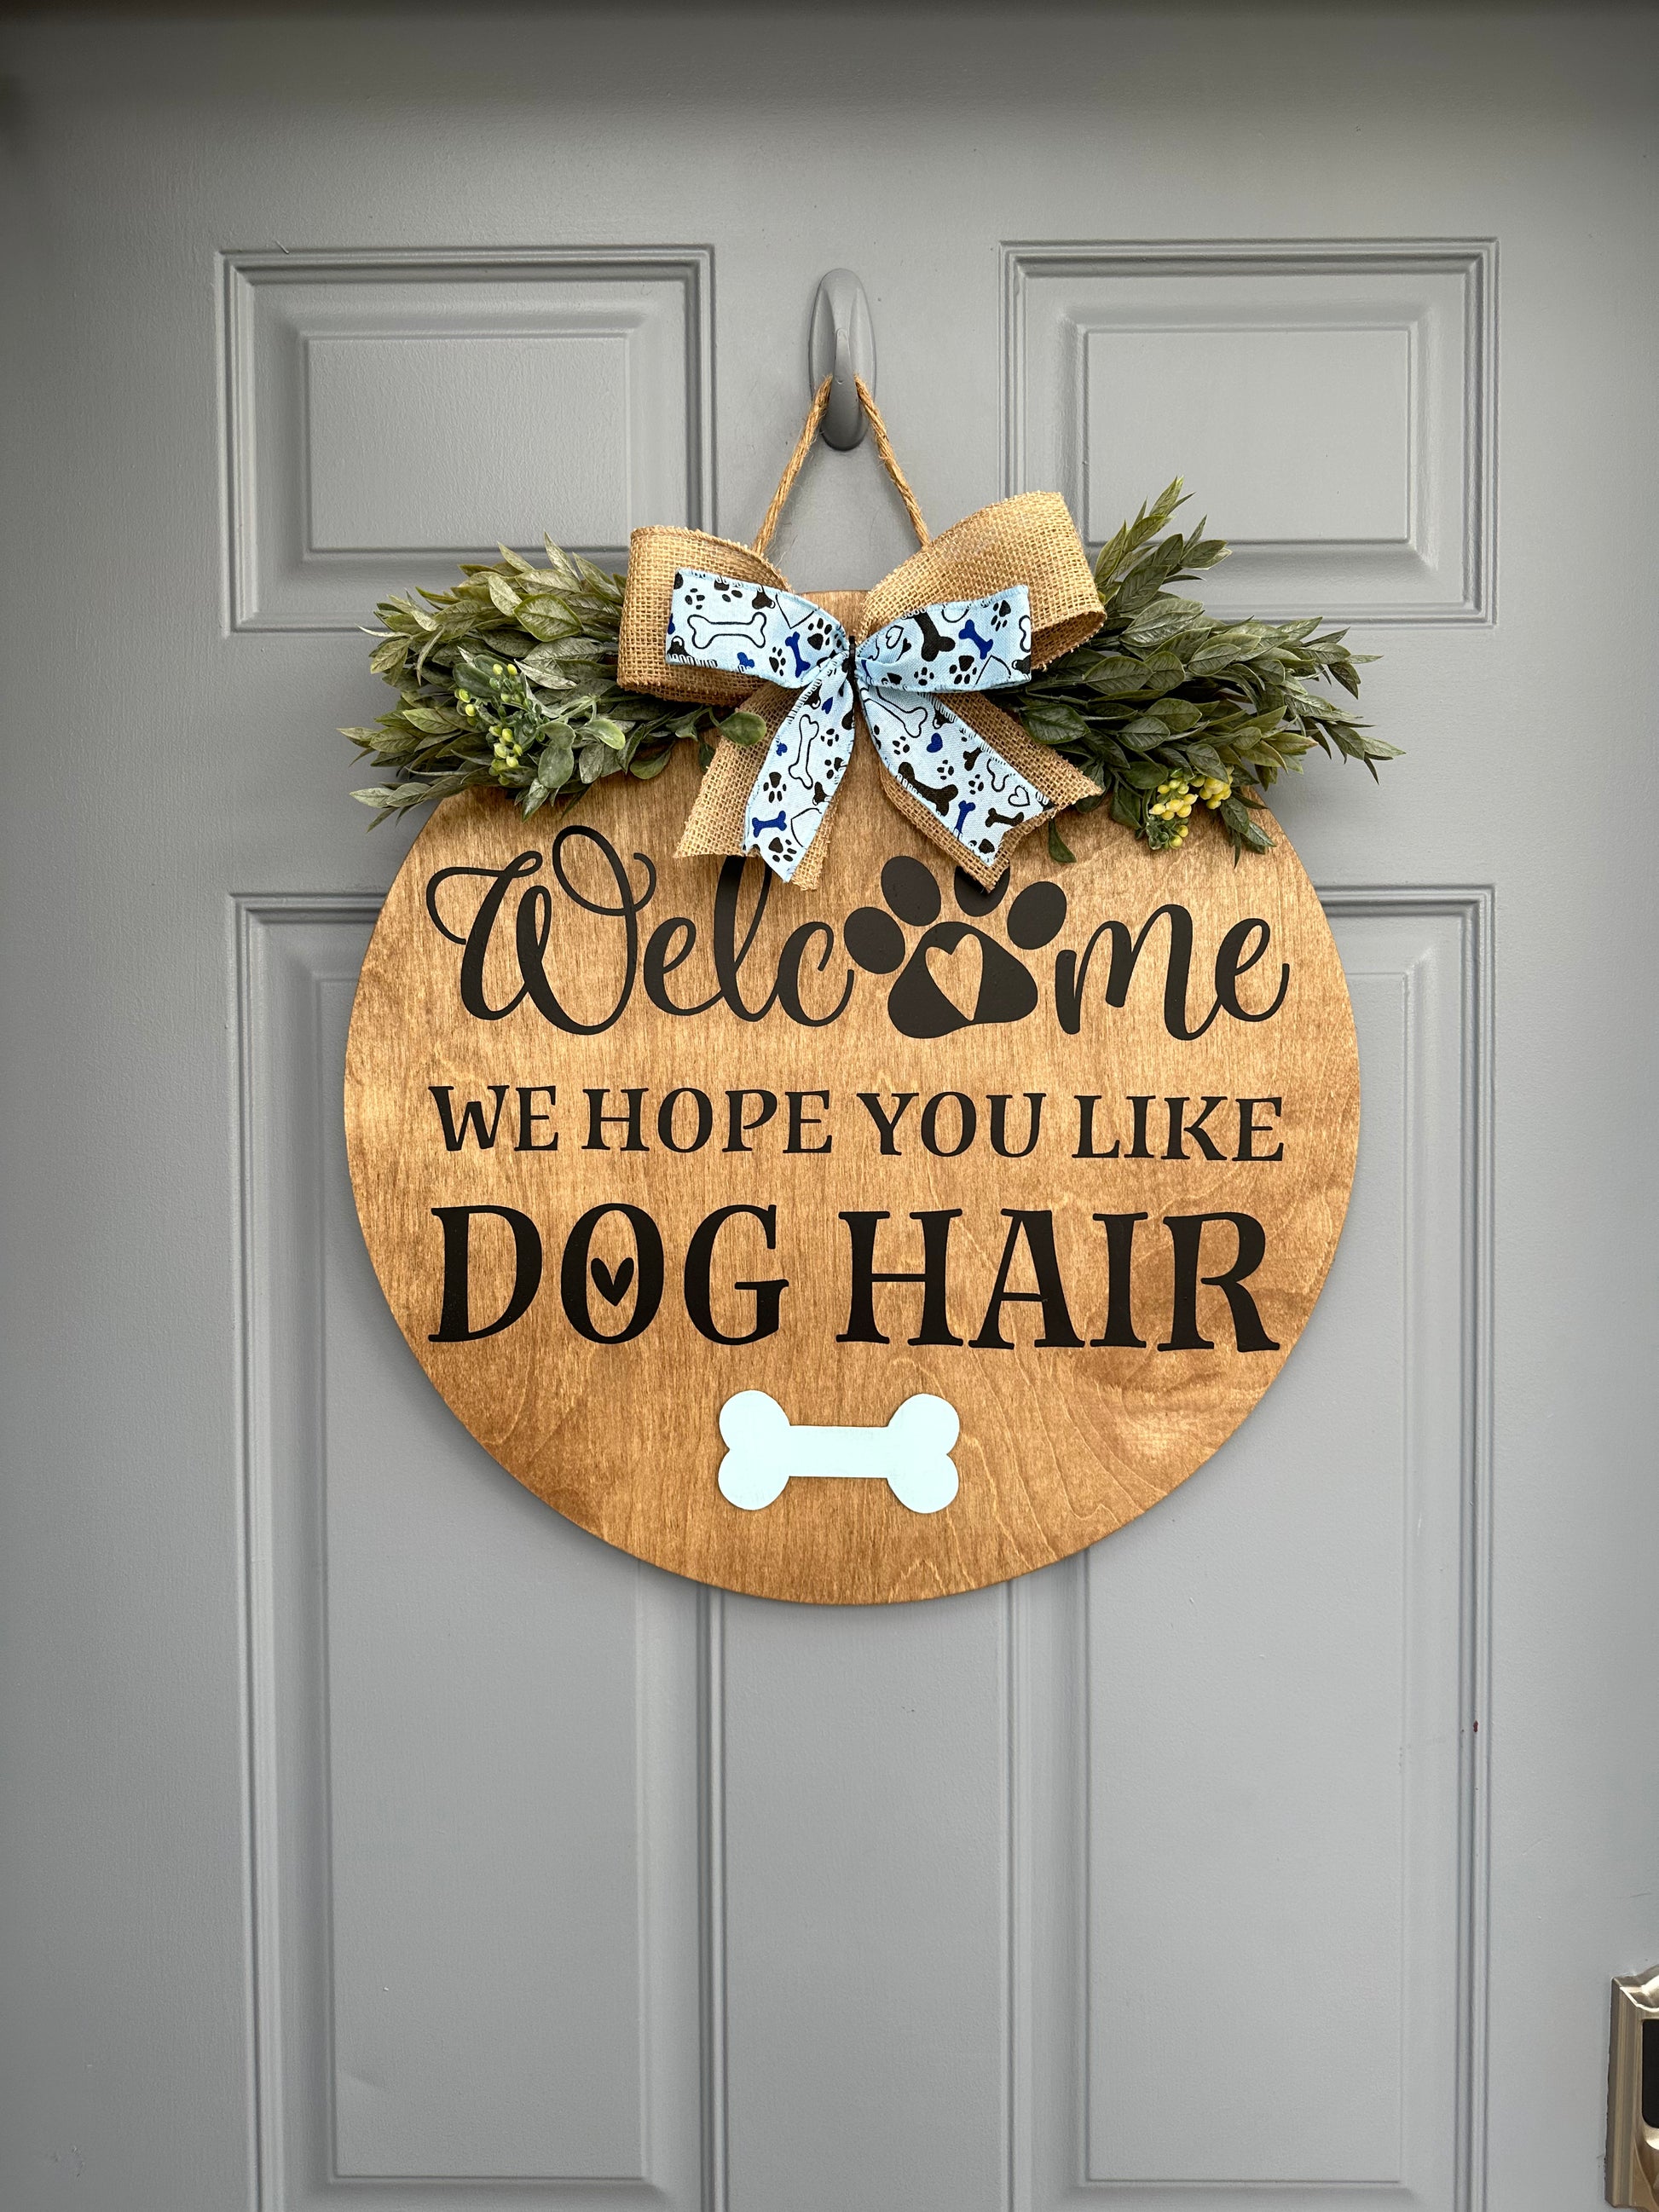 Welcome, We Hope You Like Dog Hair Door sign - Willow Love Bug Designs 